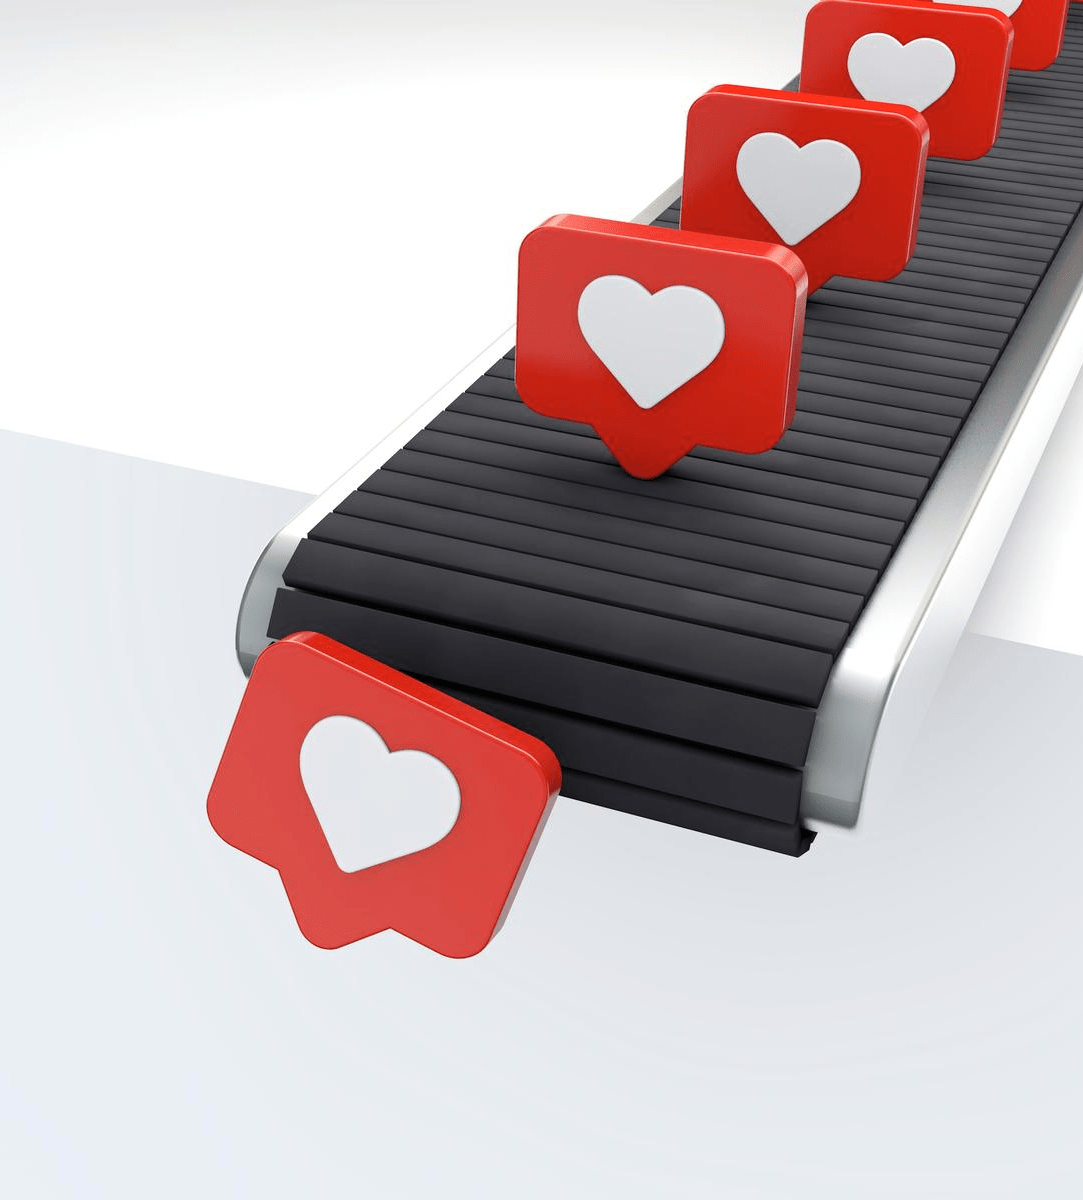 A moving conveyor belt with a blank background. Social media hearts, representing likes, are coming down the conveyor belt.